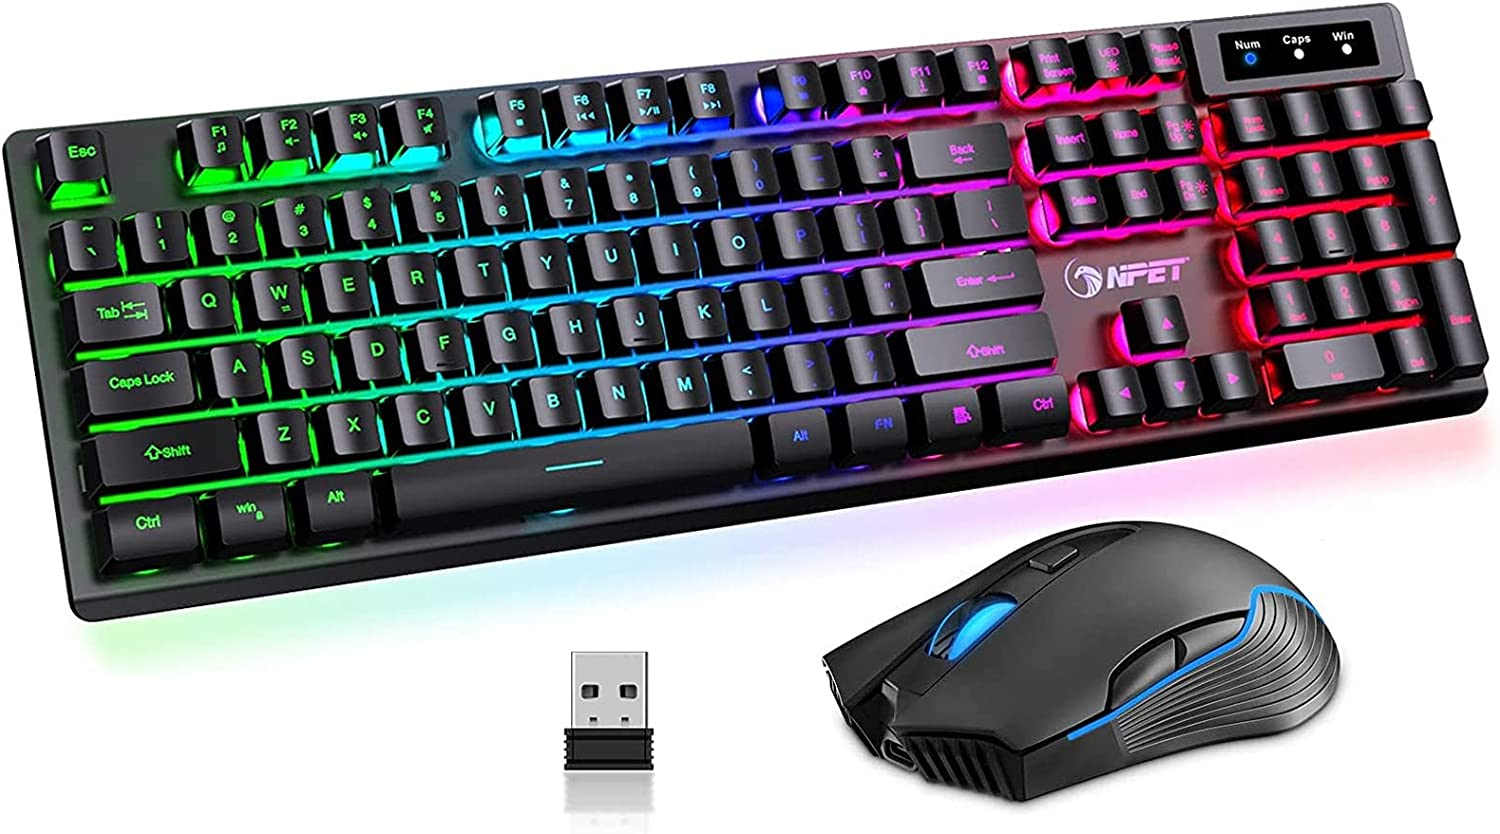 NPET S21 Wireless Gaming Keyboard and Mouse Combo, Black